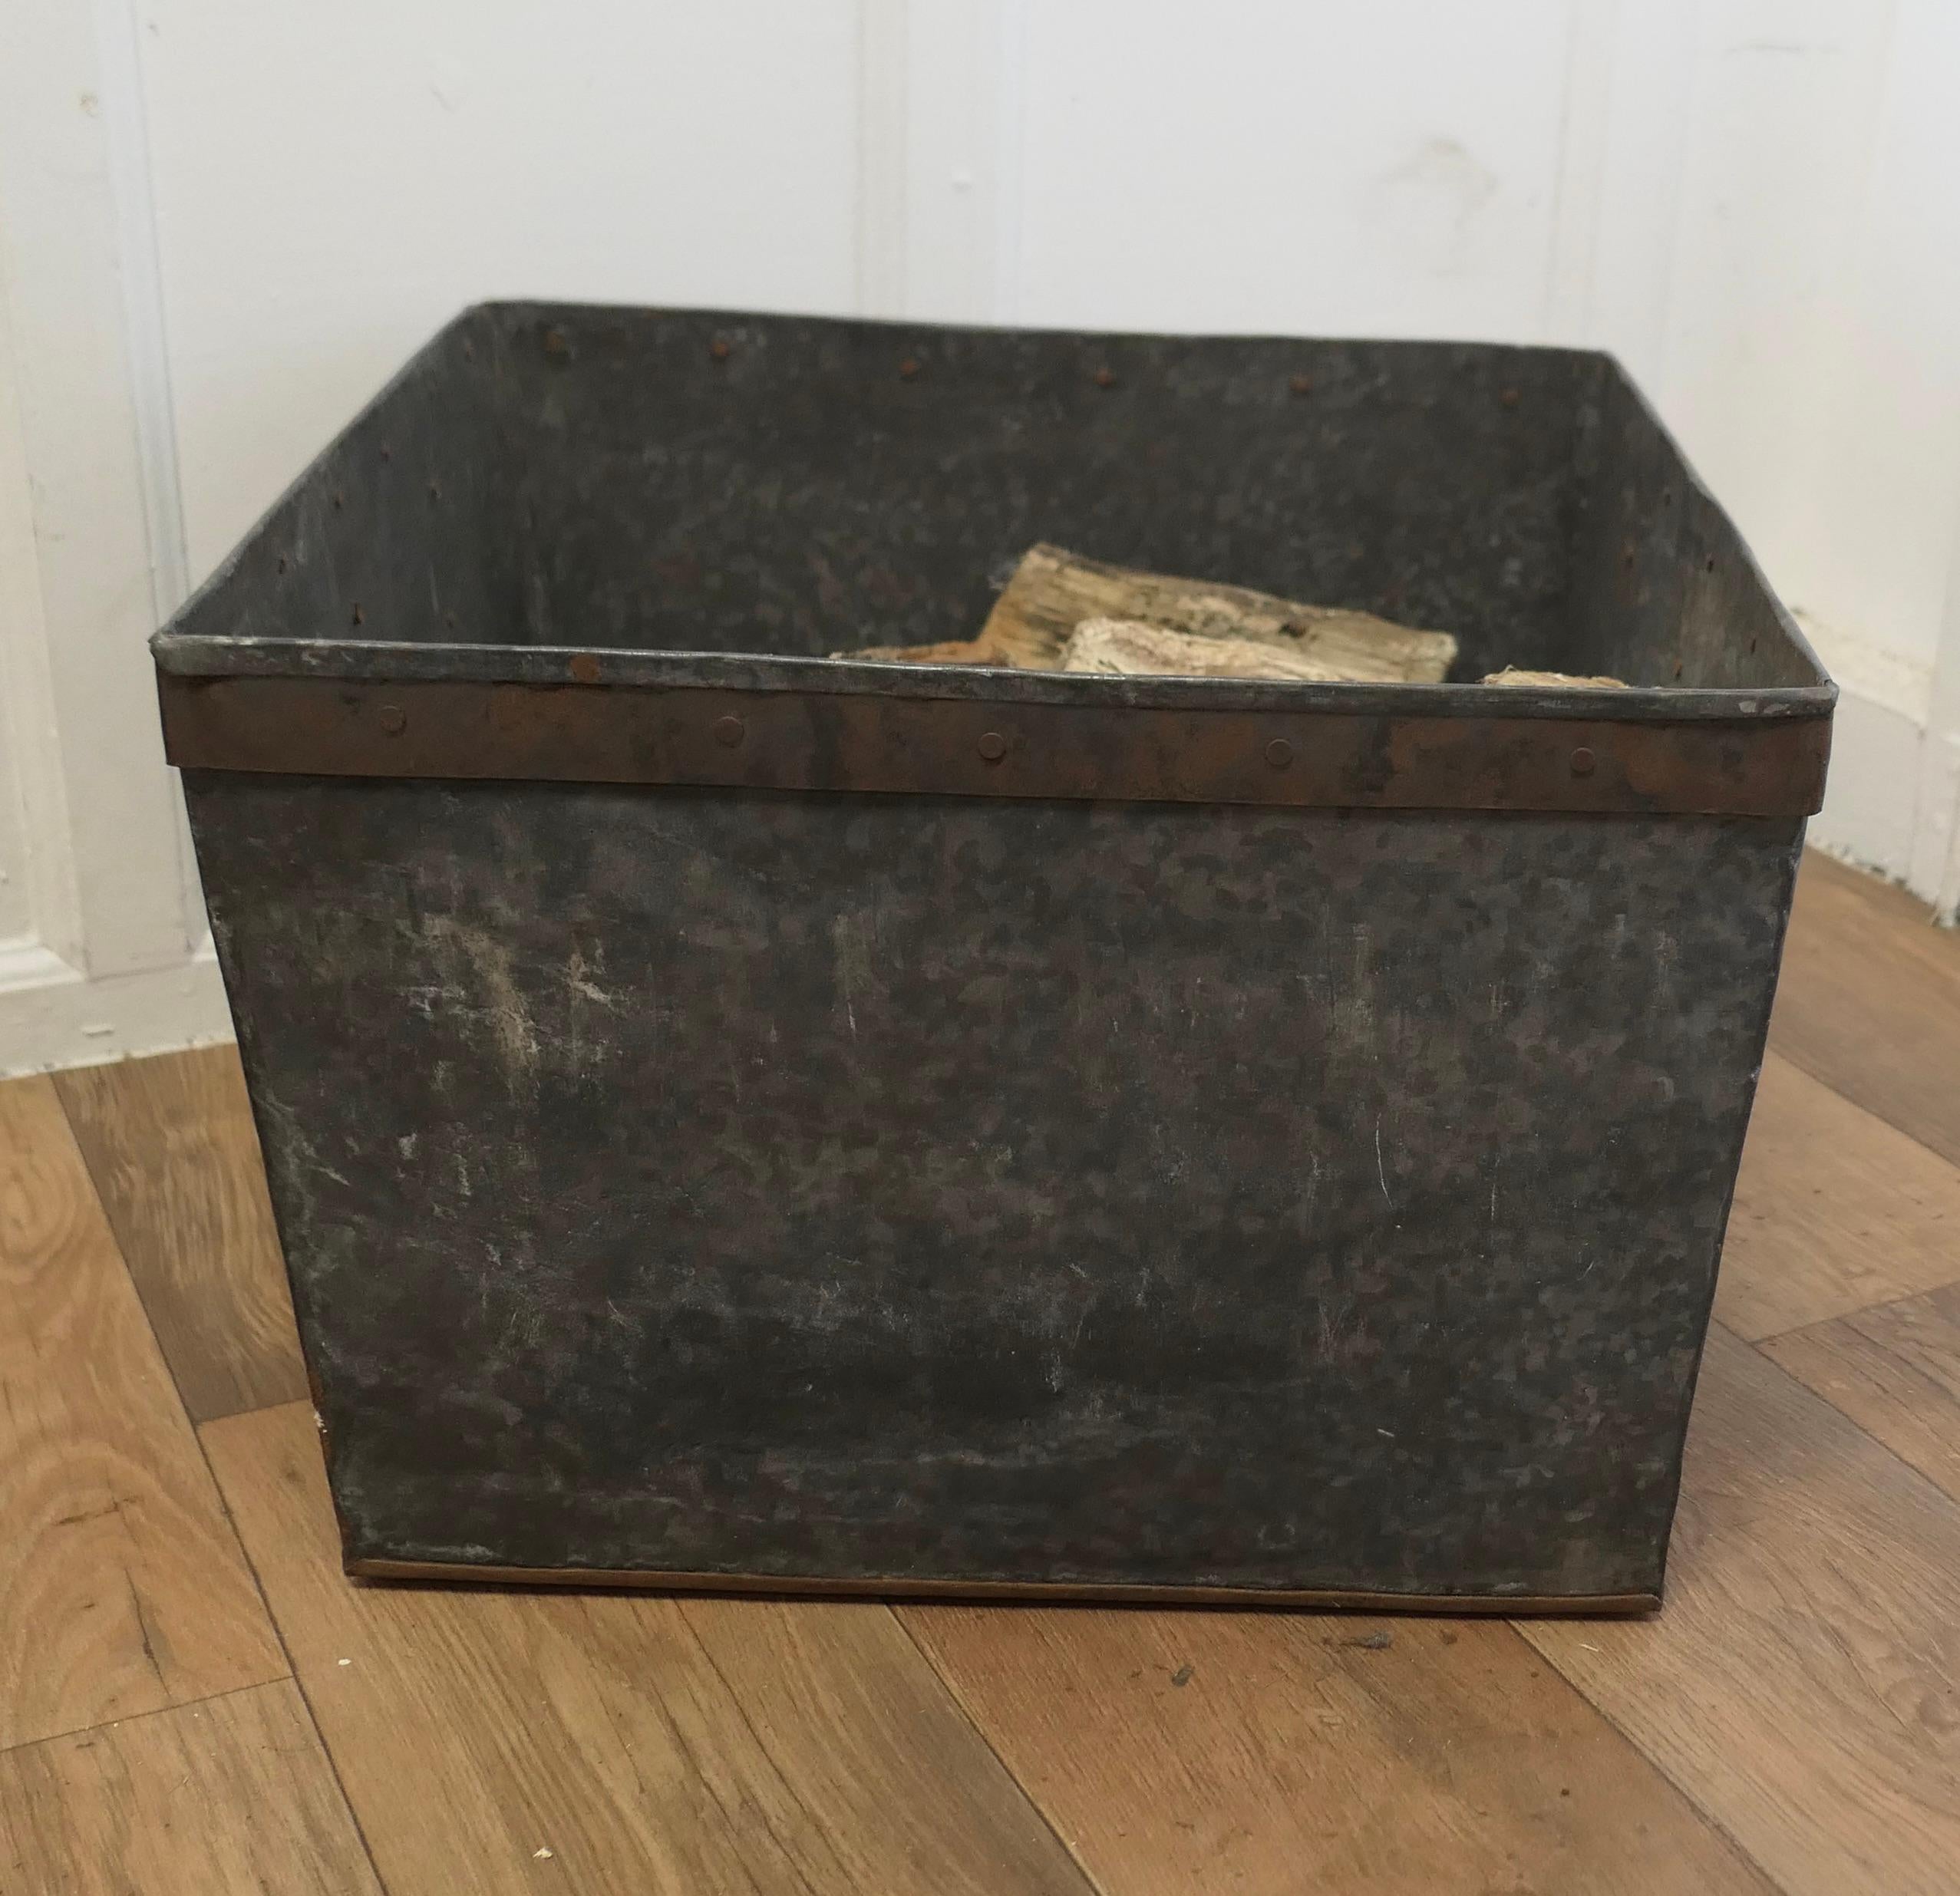 Very Strong Industrial Look Iron Banded Log Box

A good Strong Metal Log Box with large handles and reinforced with Iron Banding for added strength, this industrial looking piece makes an attractive and useful Log Box, it has impressed markings in